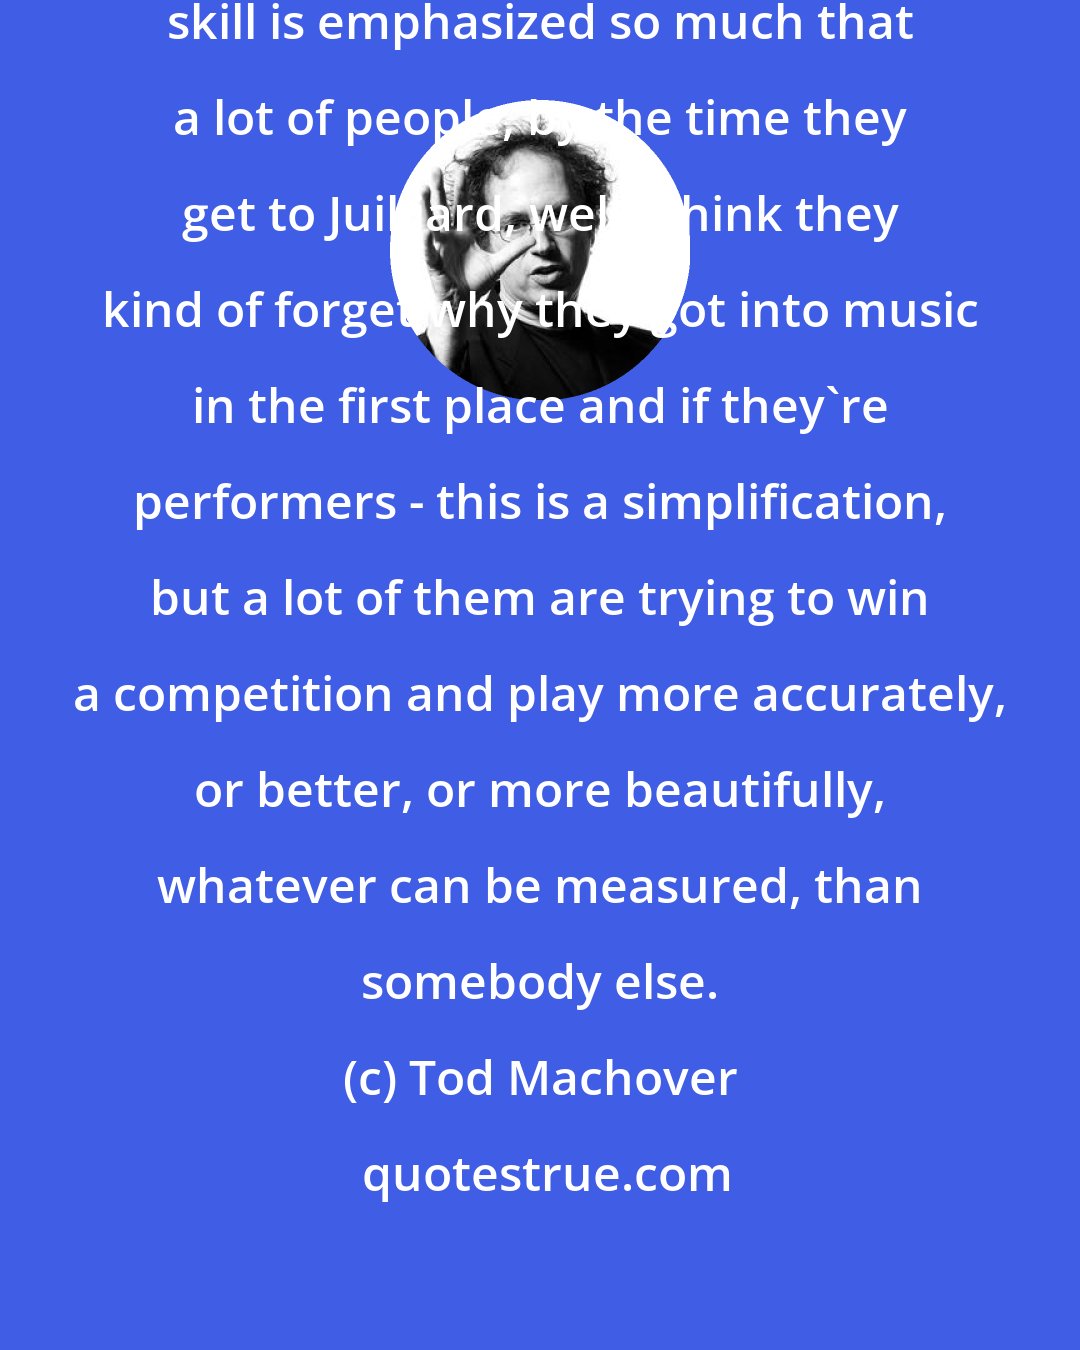 Tod Machover: I think part of the bad thing is that skill is emphasized so much that a lot of people, by the time they get to Juilliard, well I think they kind of forget why they got into music in the first place and if they're performers - this is a simplification, but a lot of them are trying to win a competition and play more accurately, or better, or more beautifully, whatever can be measured, than somebody else.